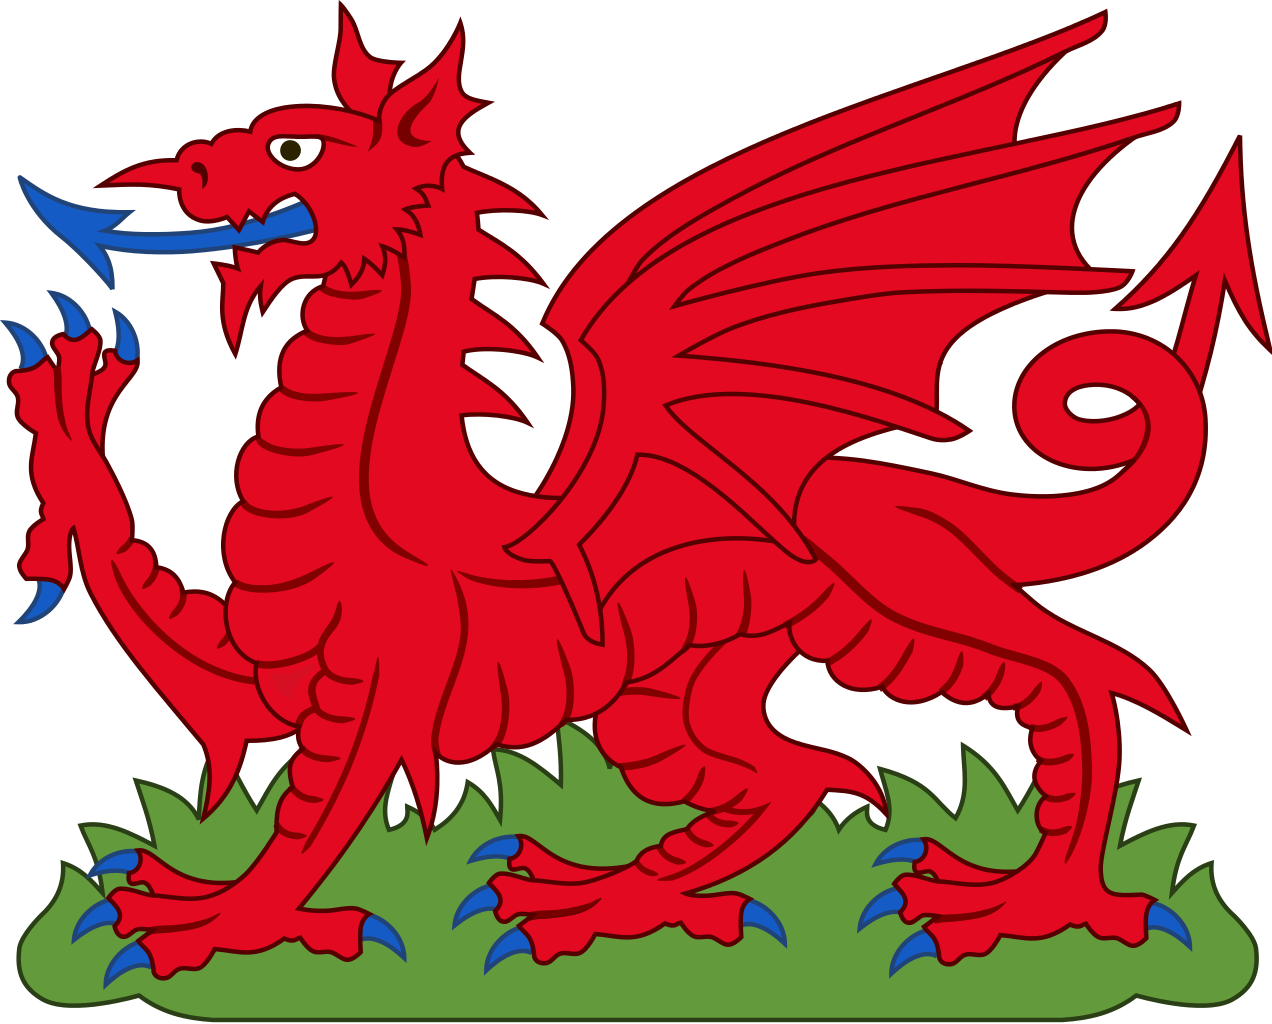 Wales Flag PNG Free Download